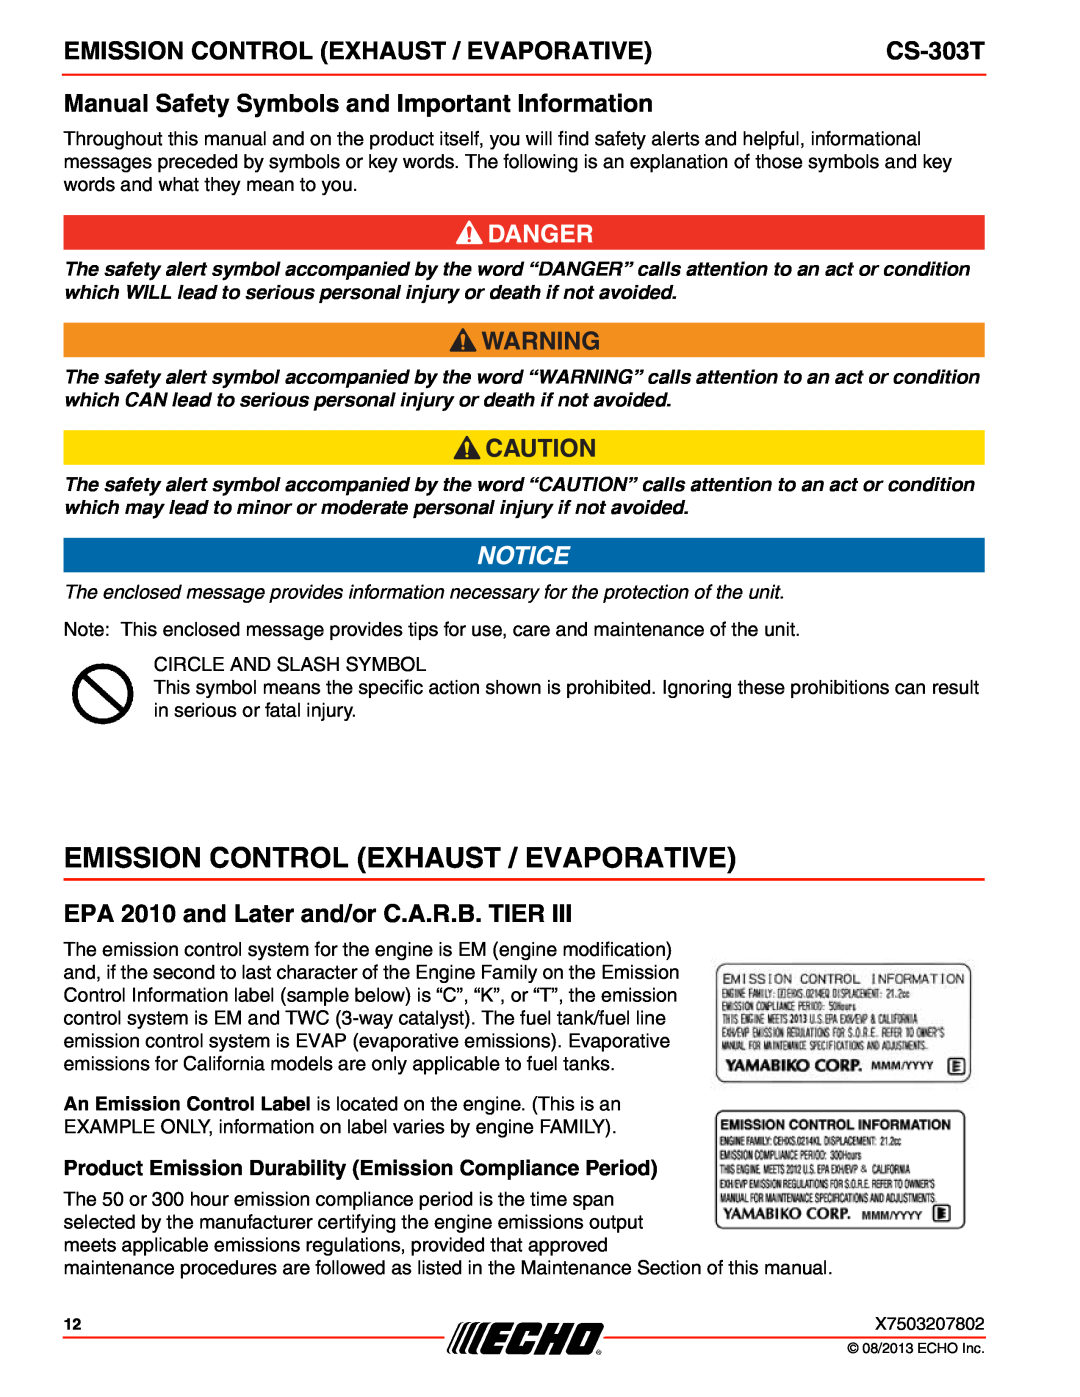 Echo CS-303T instruction manual Emission Control Exhaust / Evaporative, Manual Safety Symbols and Important Information 